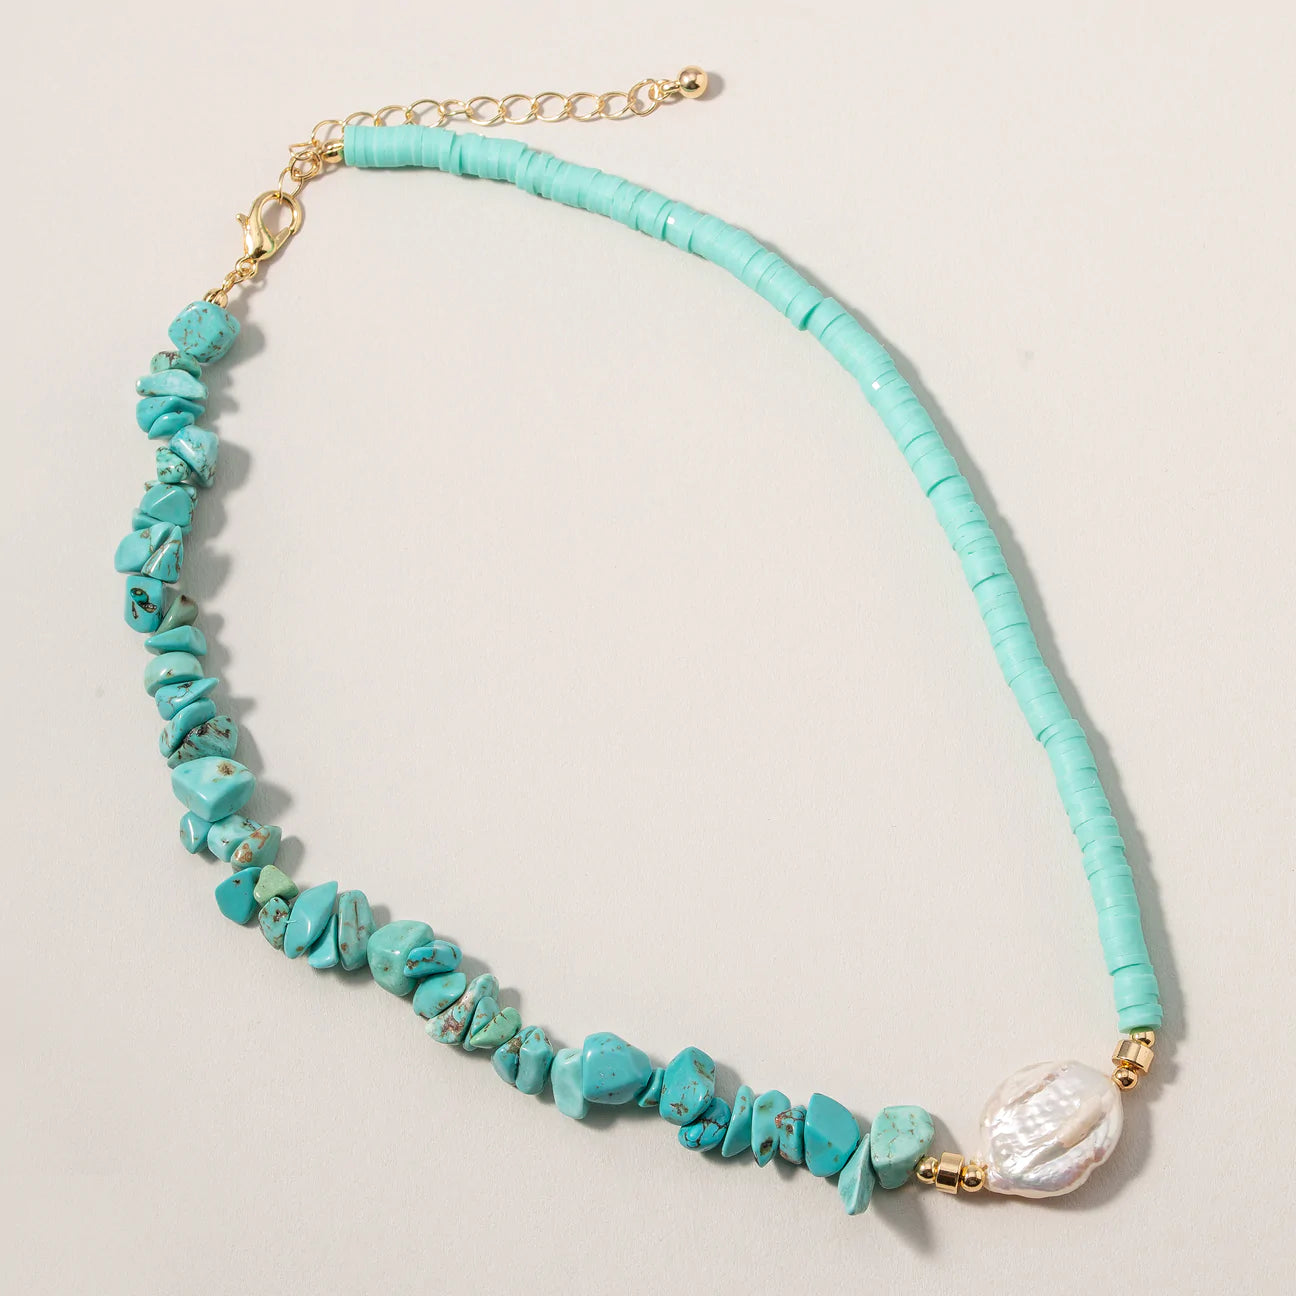 ‘ABBIE’ Necklace - Turquoise